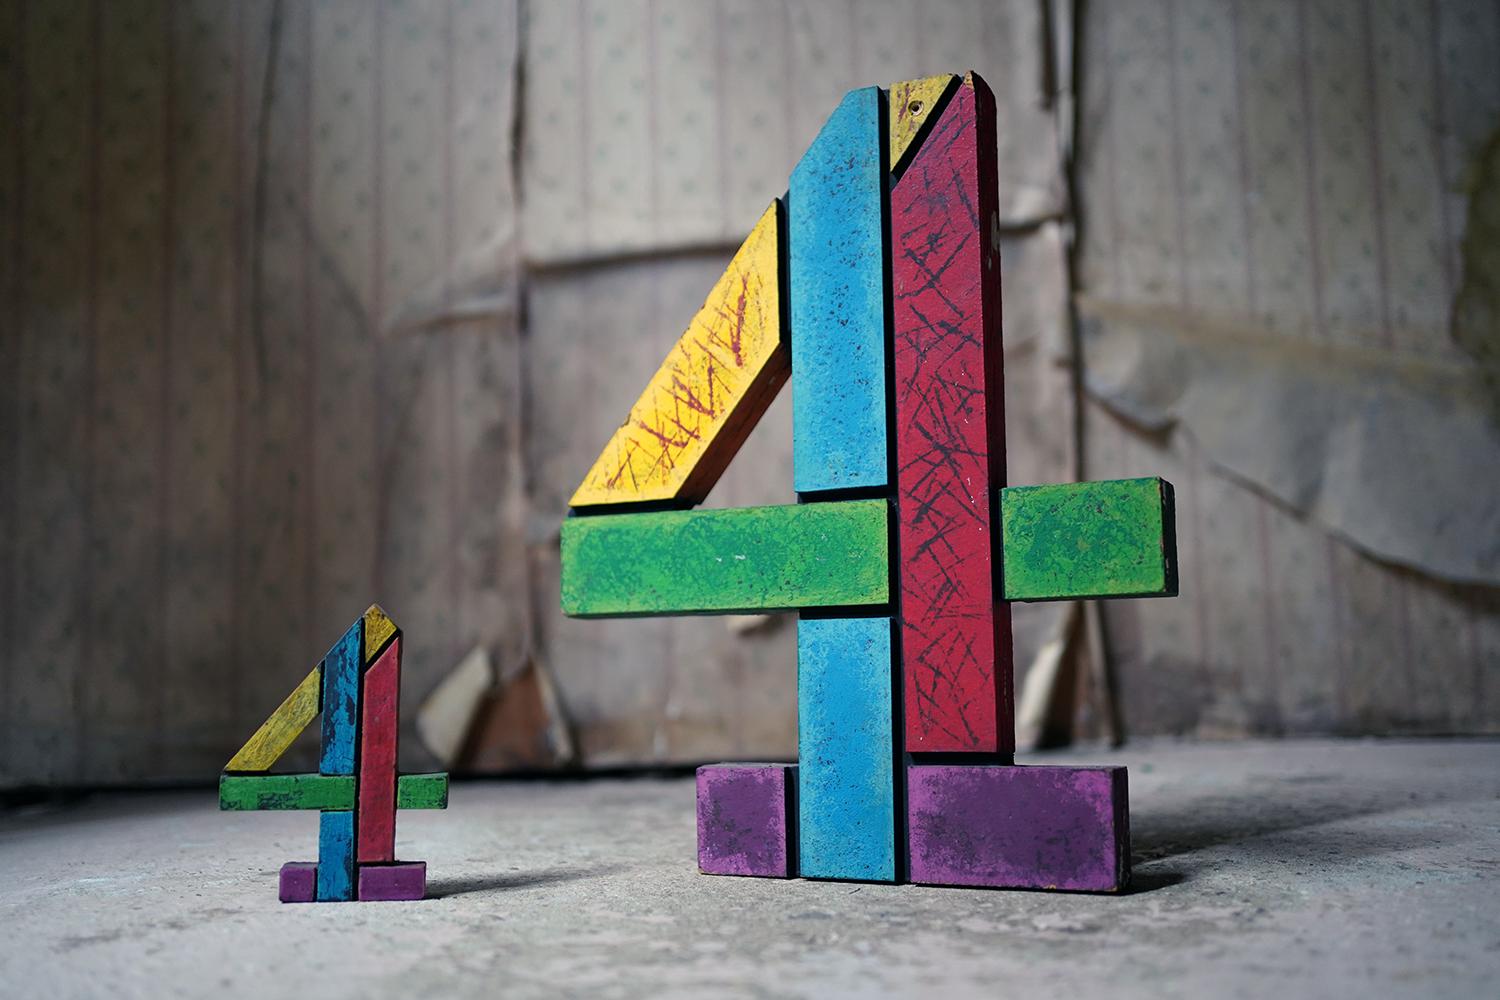 Mid-Century Modern Two 20thC Channel 4 Production Painted Wooden Block Logo Idents, c.1990-95